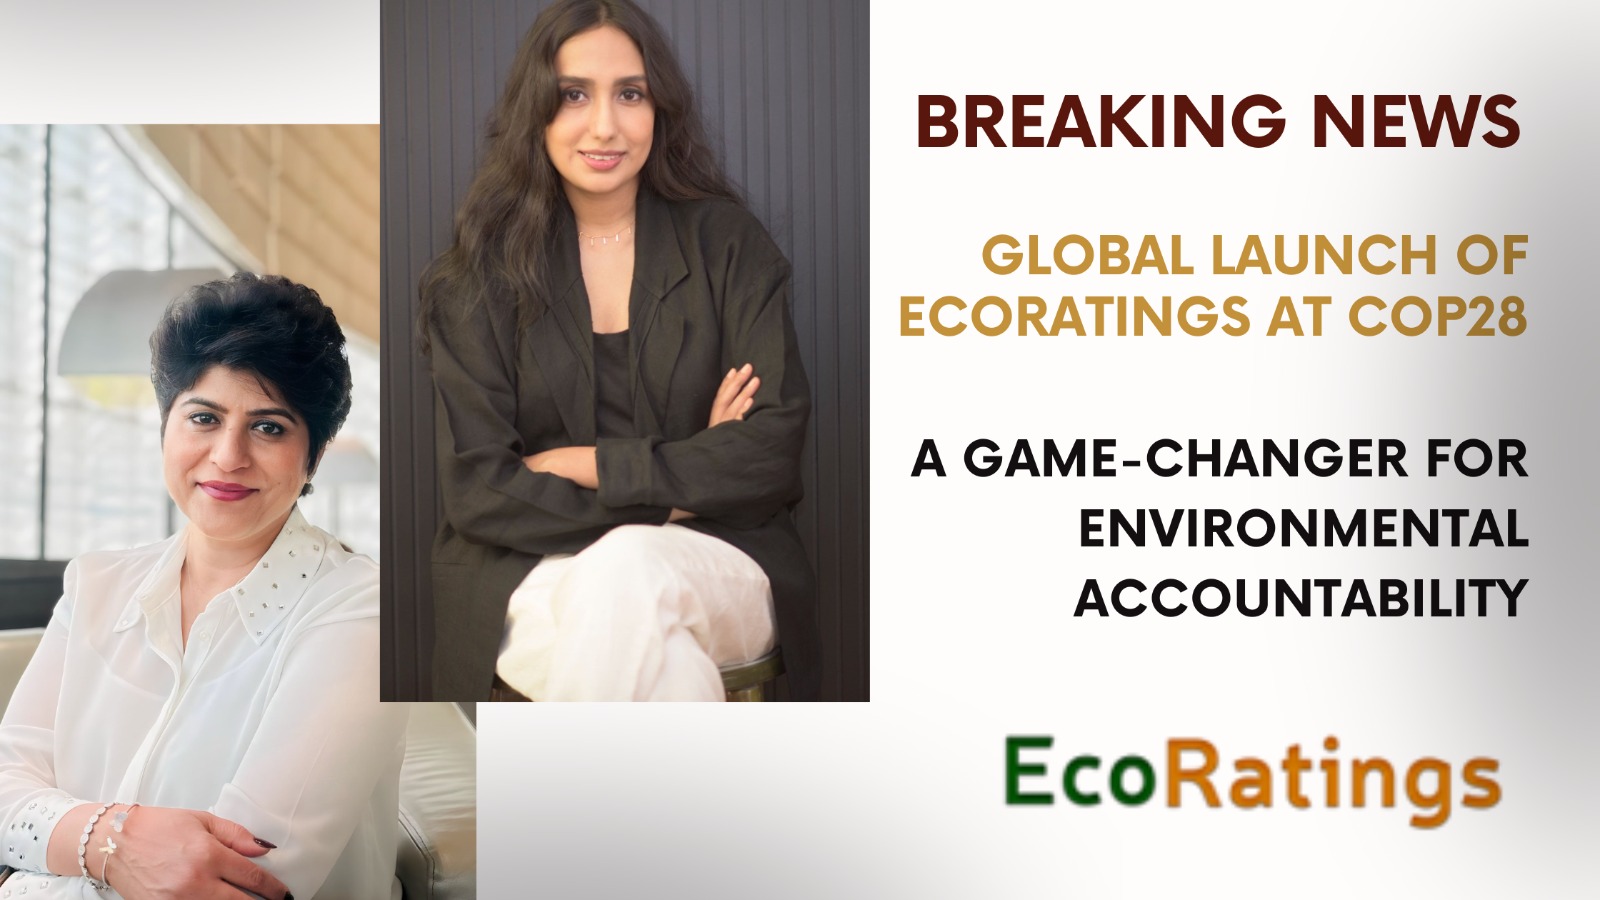 EcoRatings Launched Globally at COP28 Today